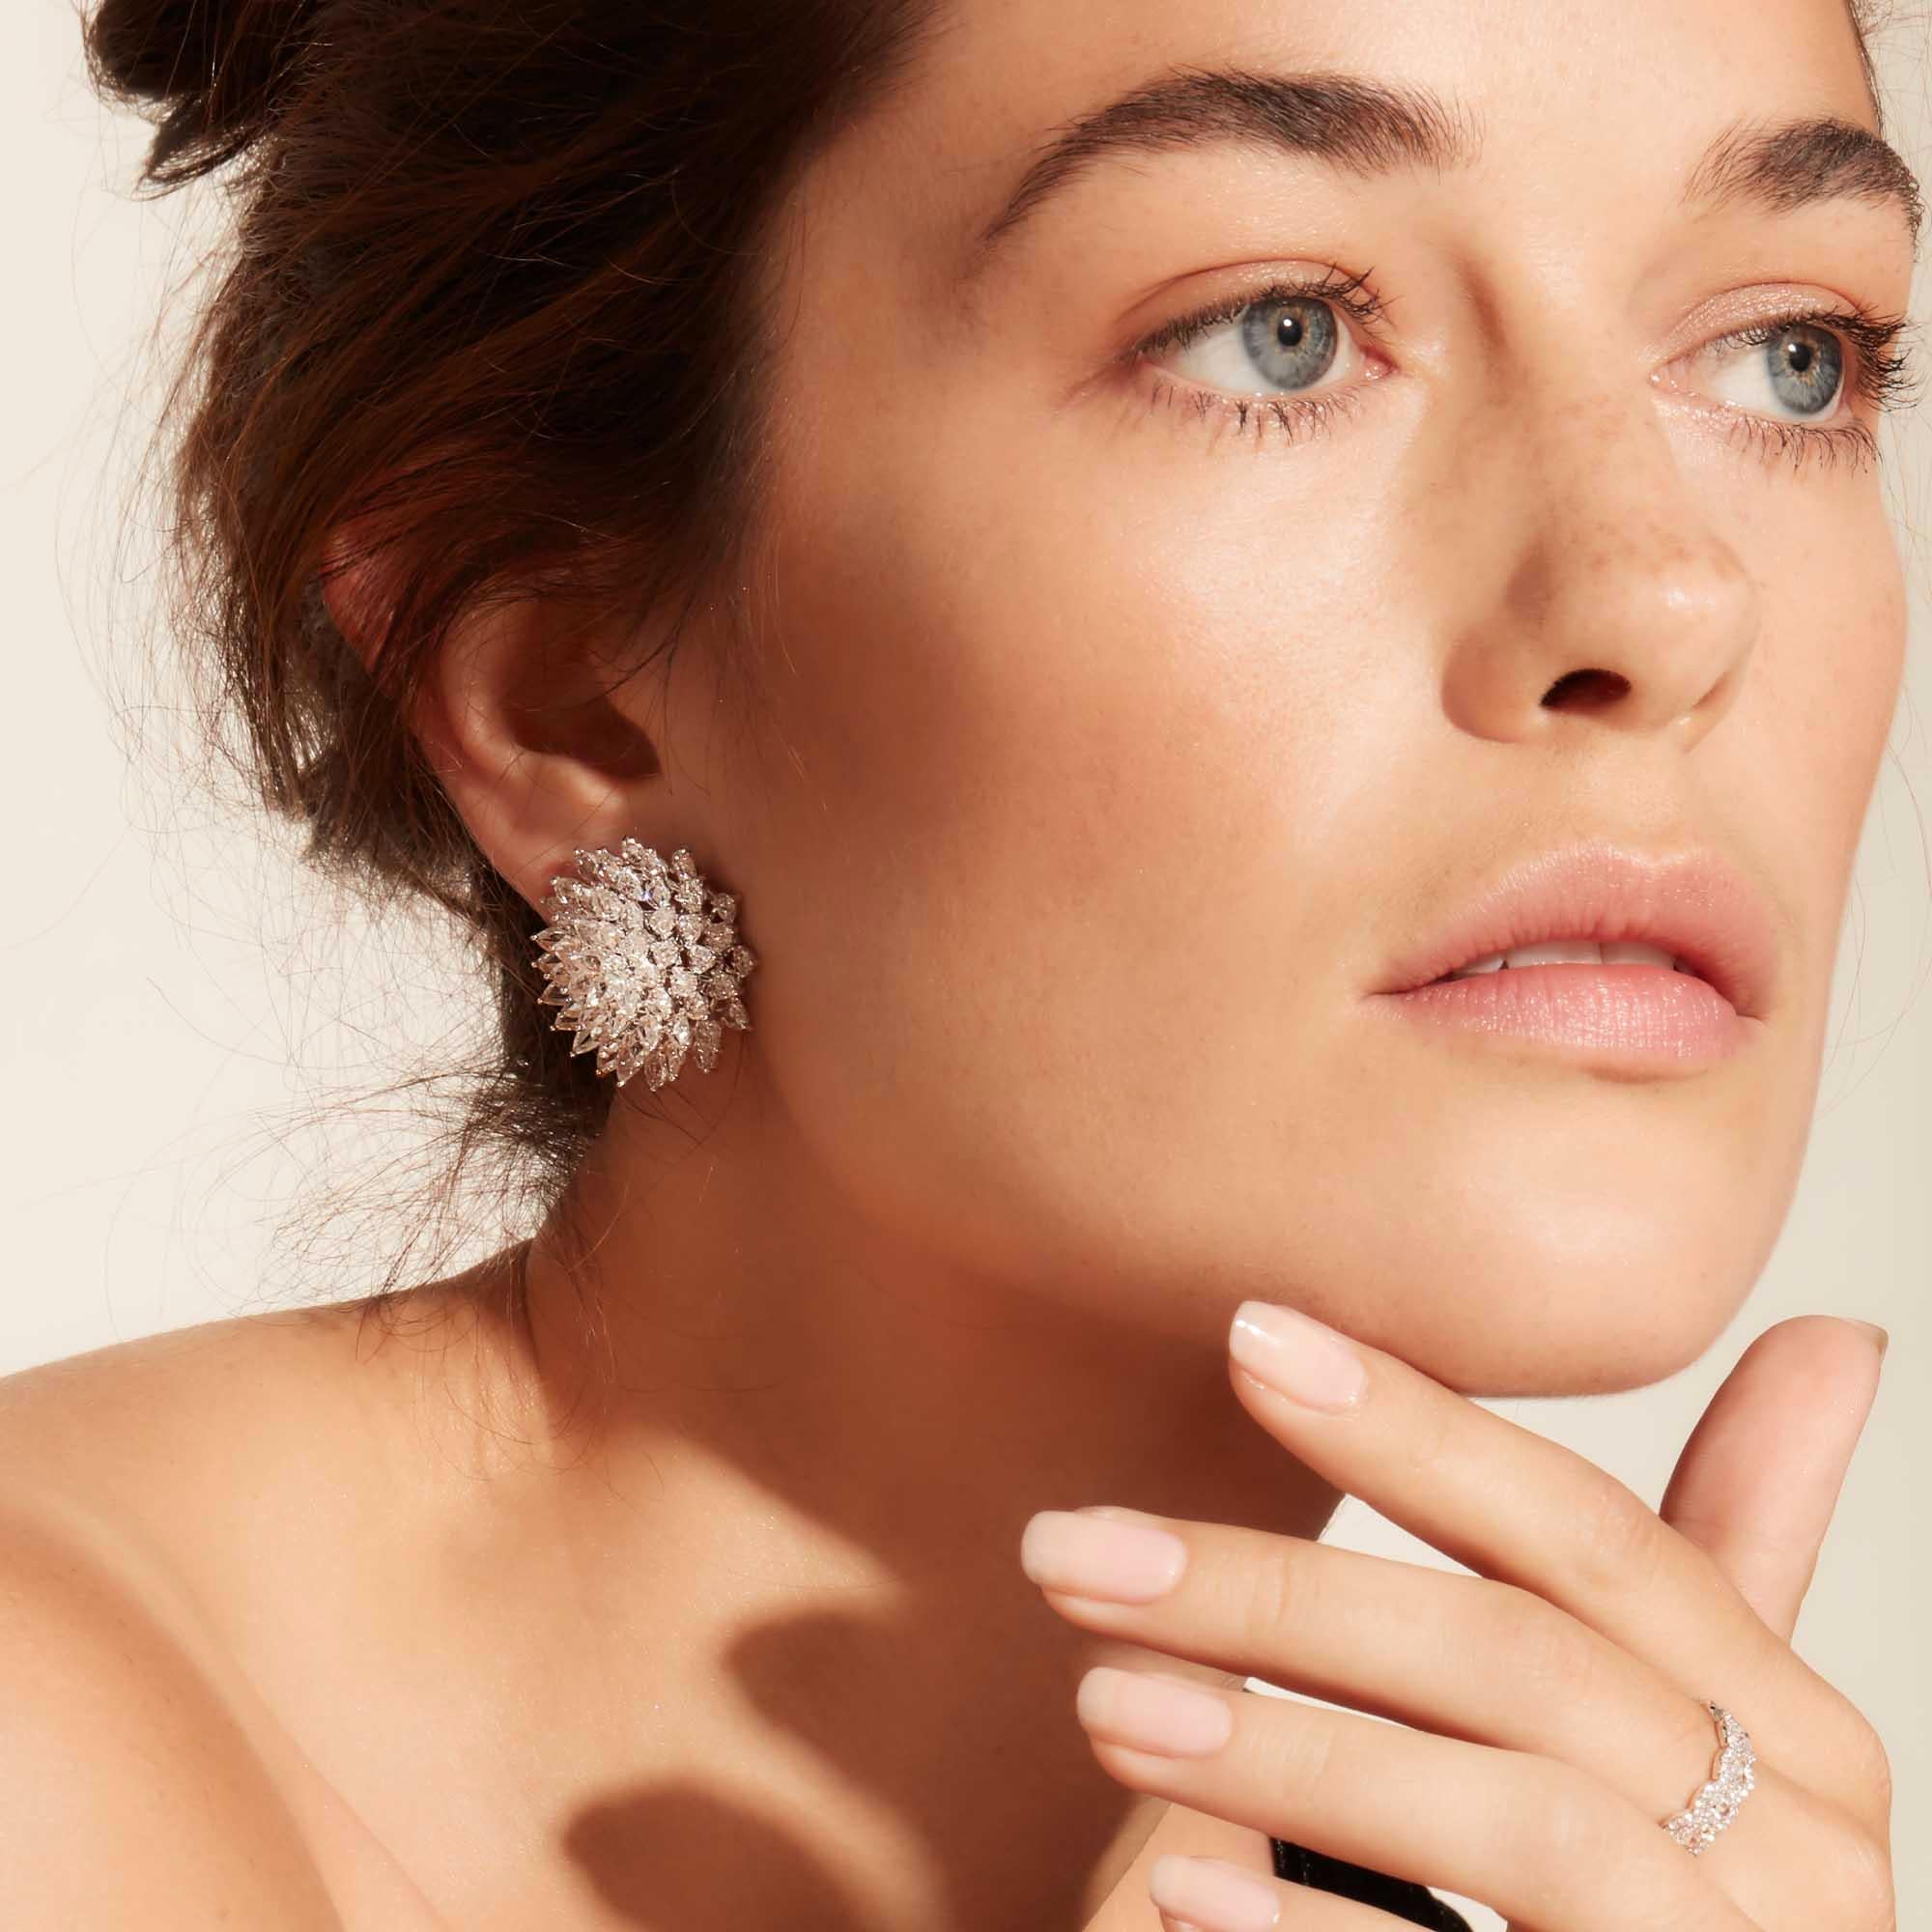 The modern embodiment of femininity, our diamond spiked studs are like shards of glass that hide frozen secrets. Unique and striking, embrace these bolder statement pieces as the perfect accompaniment on special occasions.
Gently illuminating the